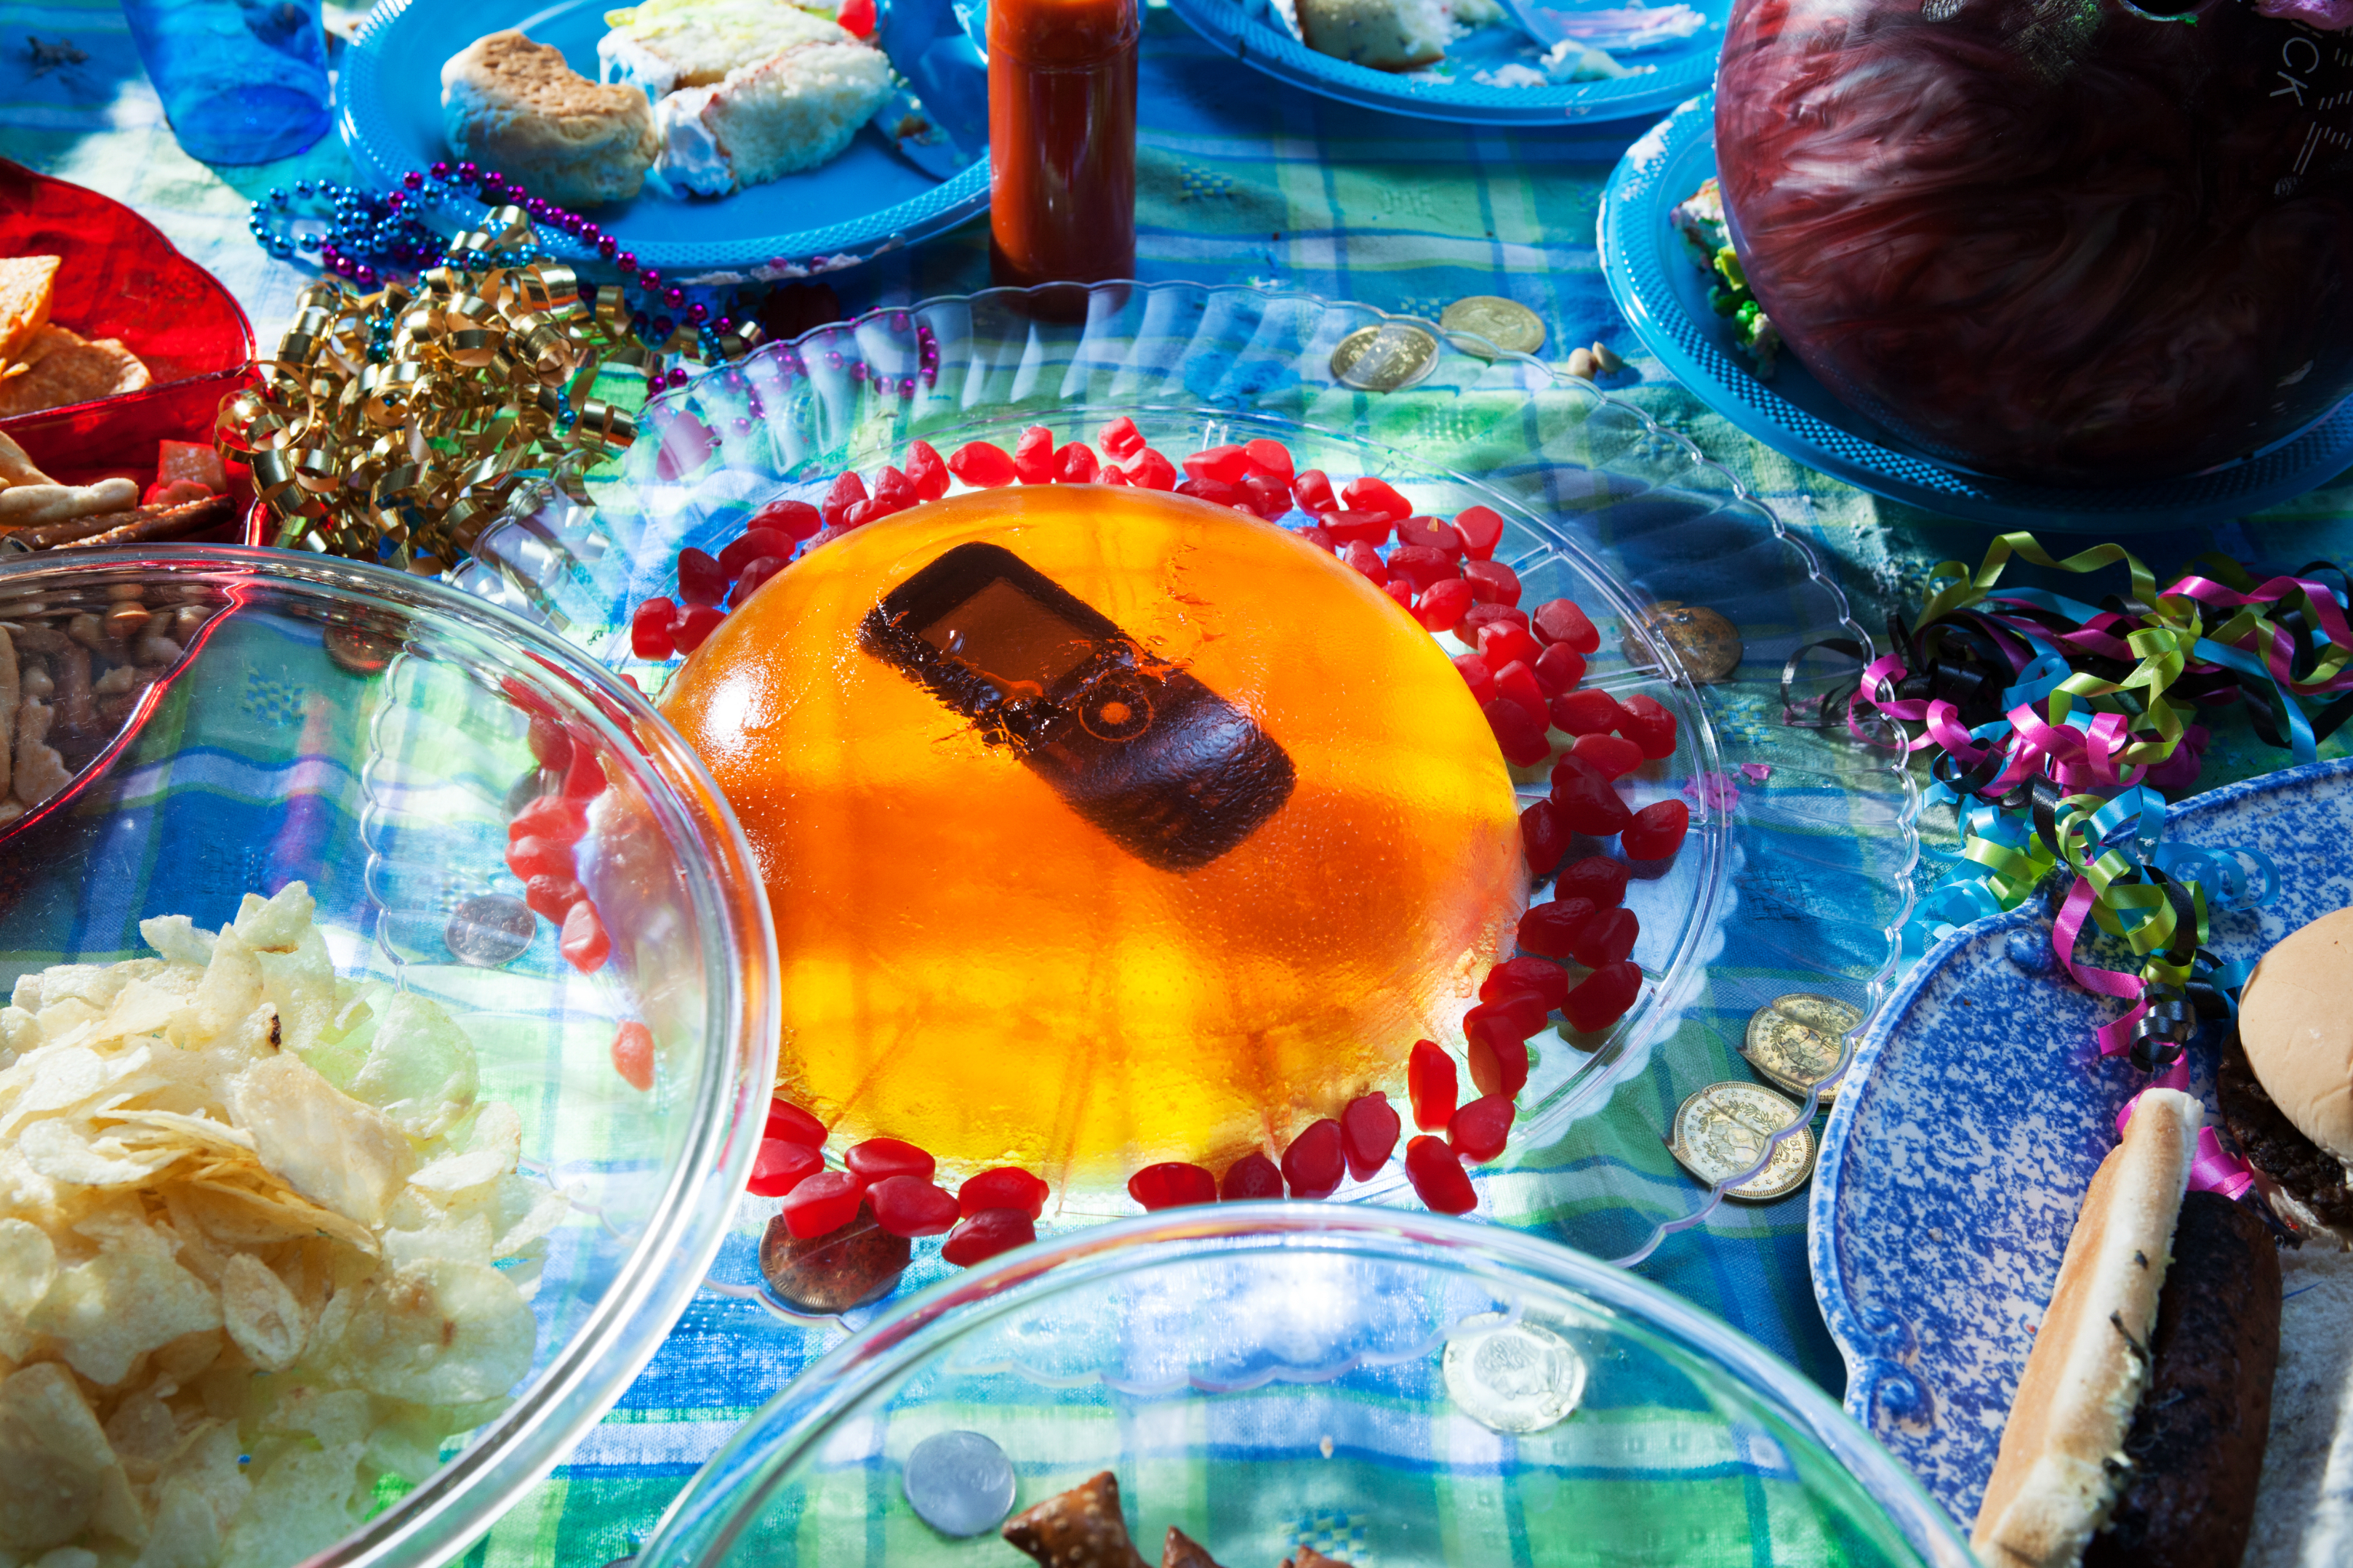 A transparent gelatin dessert with a stapler suspended inside, surrounded by a variety of food items on plates